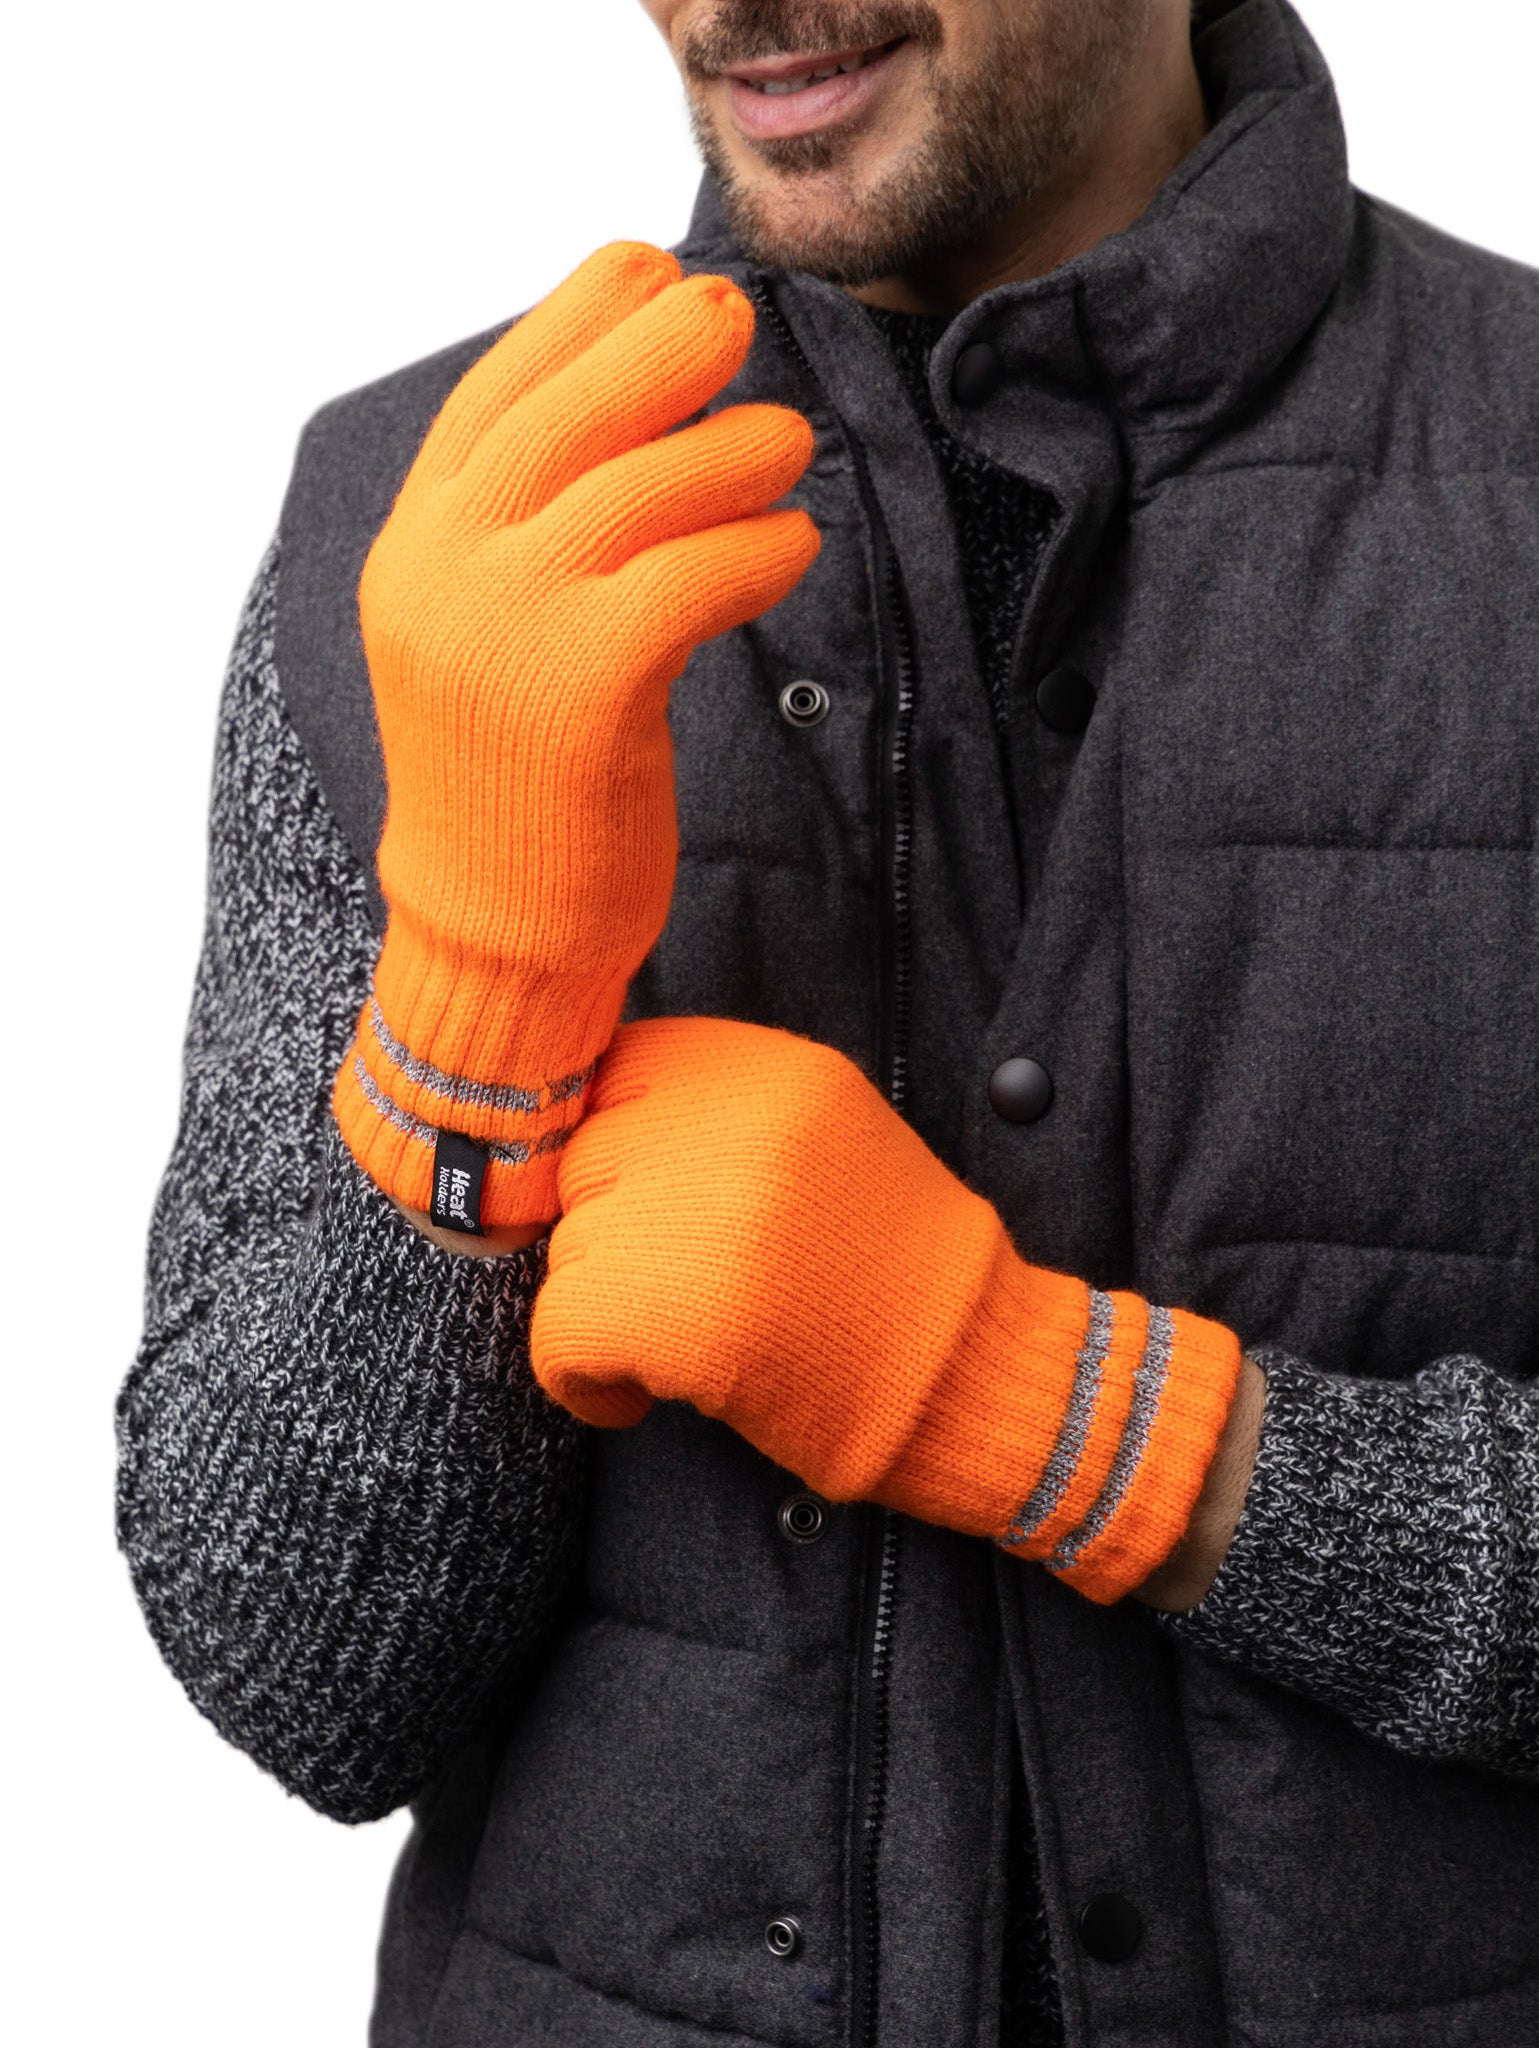 HEAT HOLDERS WRK Thermal Gloves with Reflective Stripes